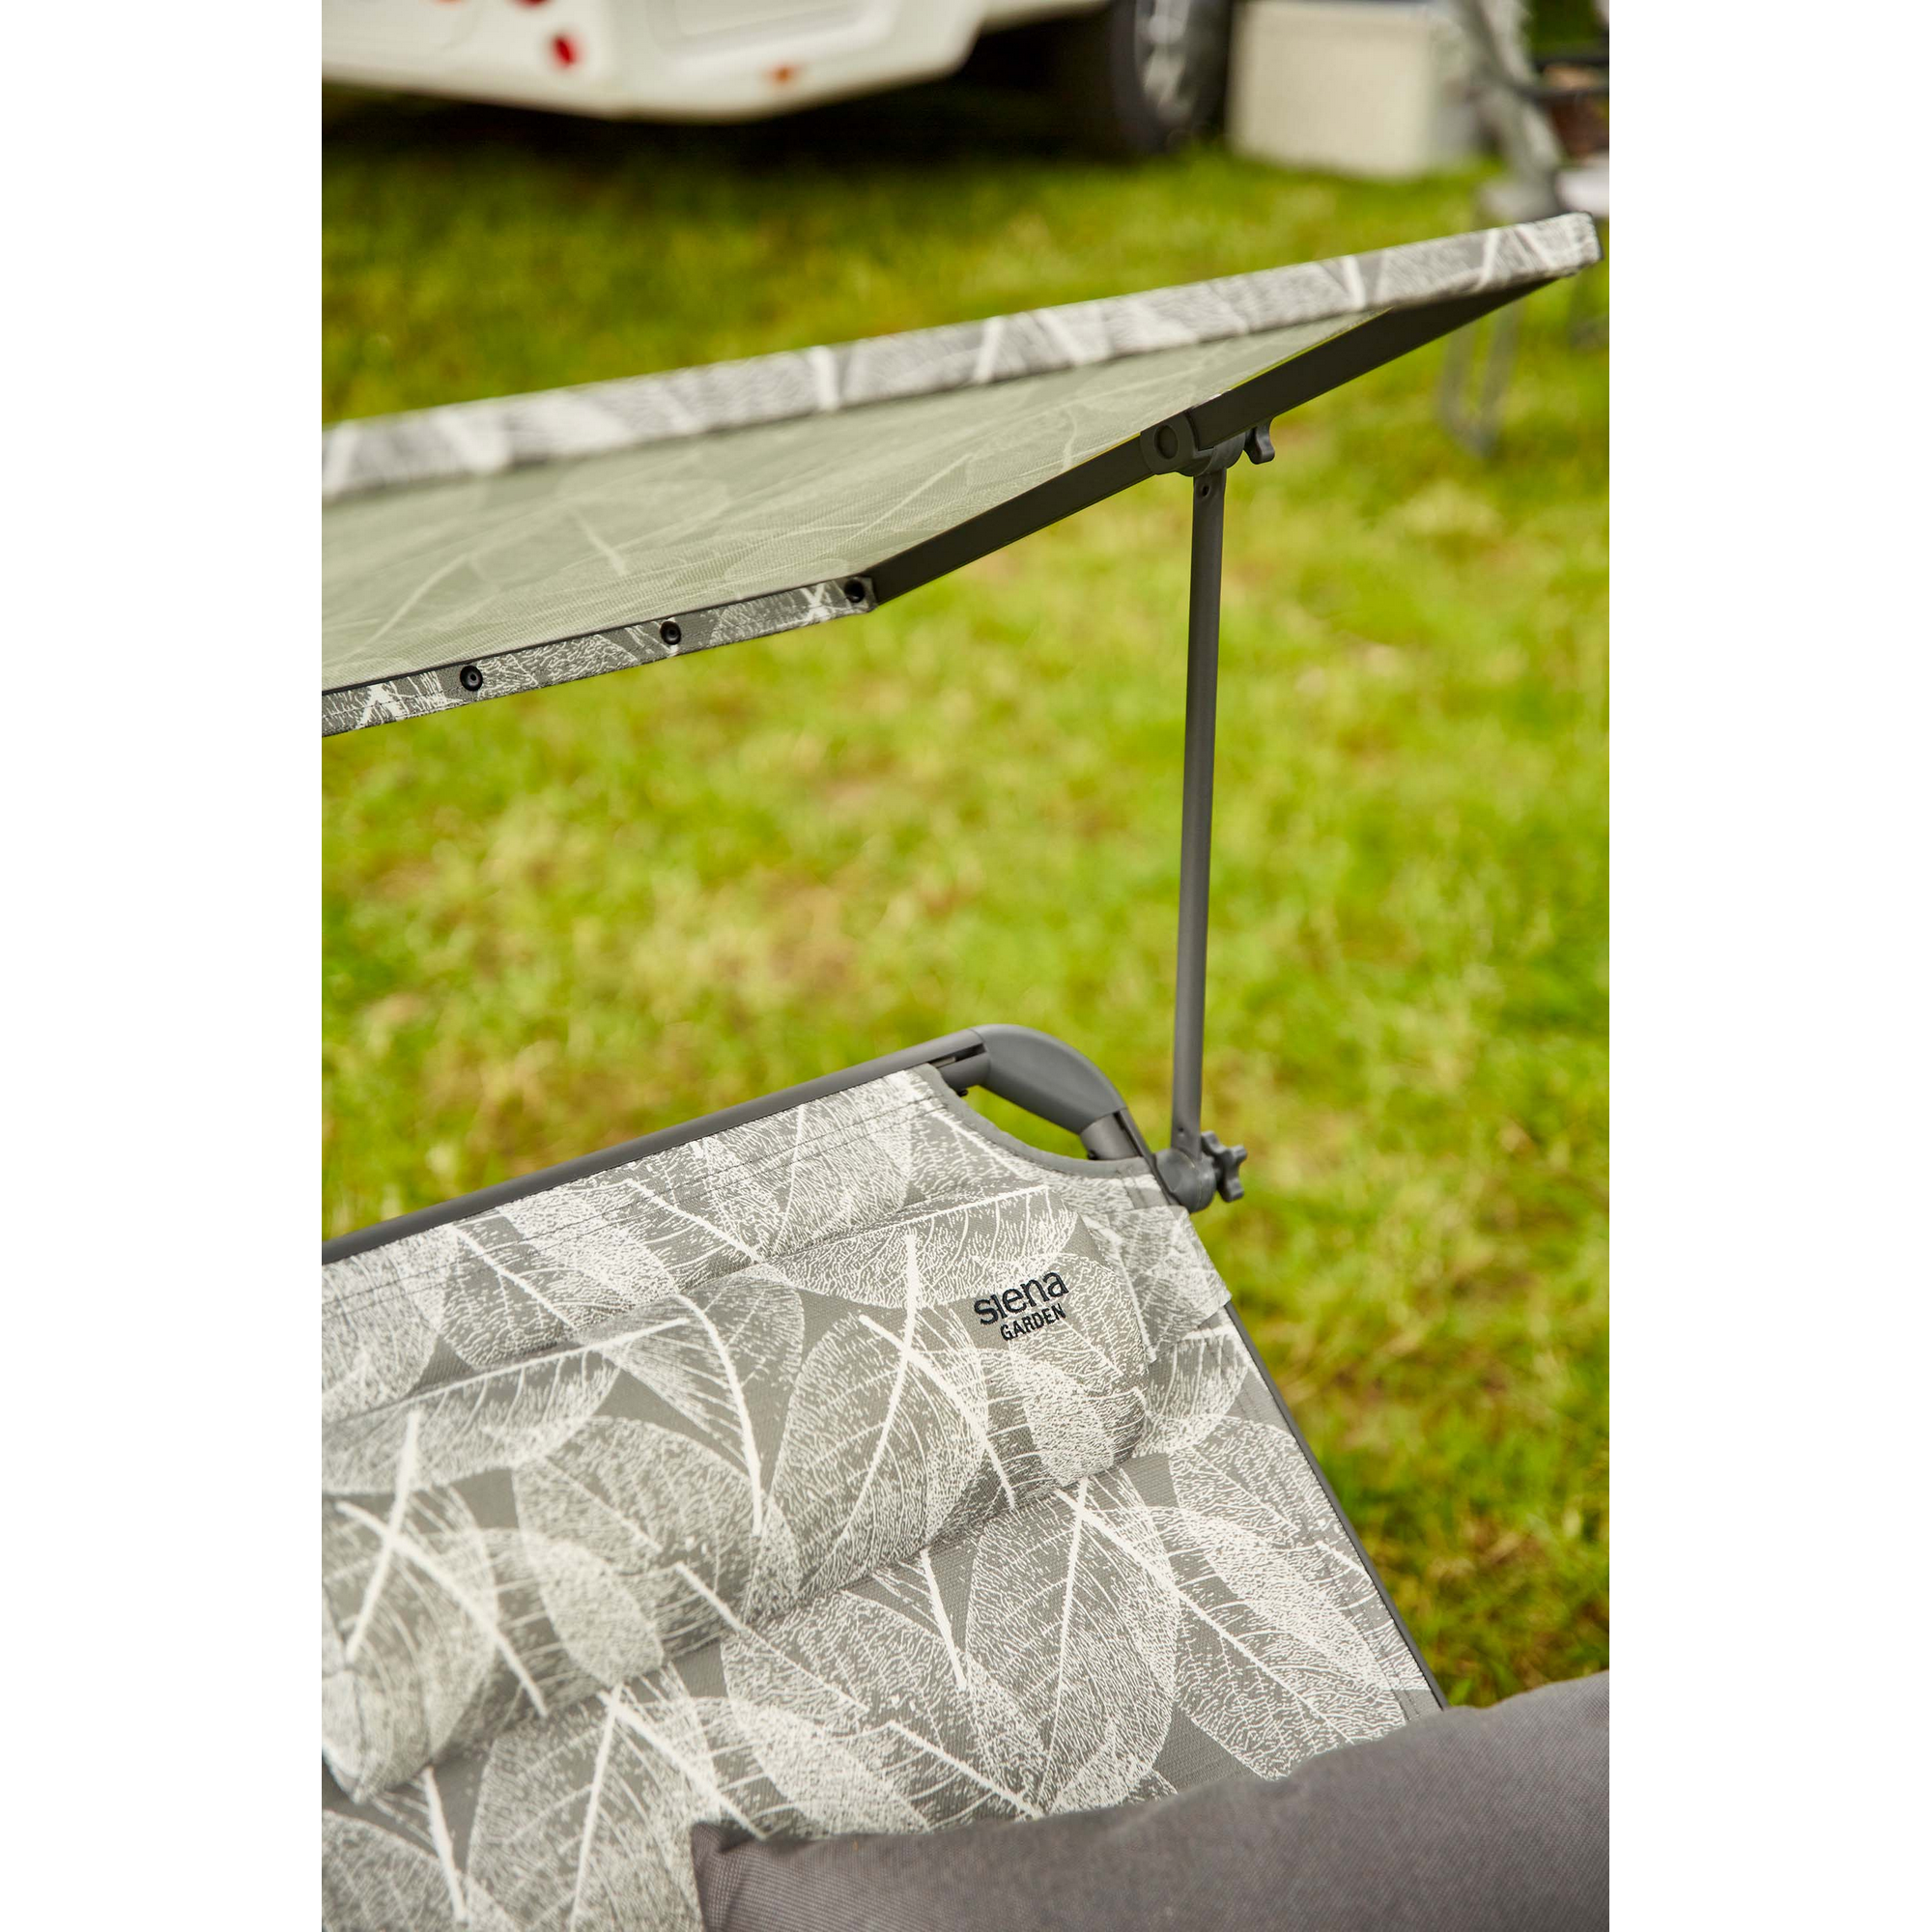 Camping-Sonnenliege 'Natura' grau 200 x 69 x 43 cm + product picture